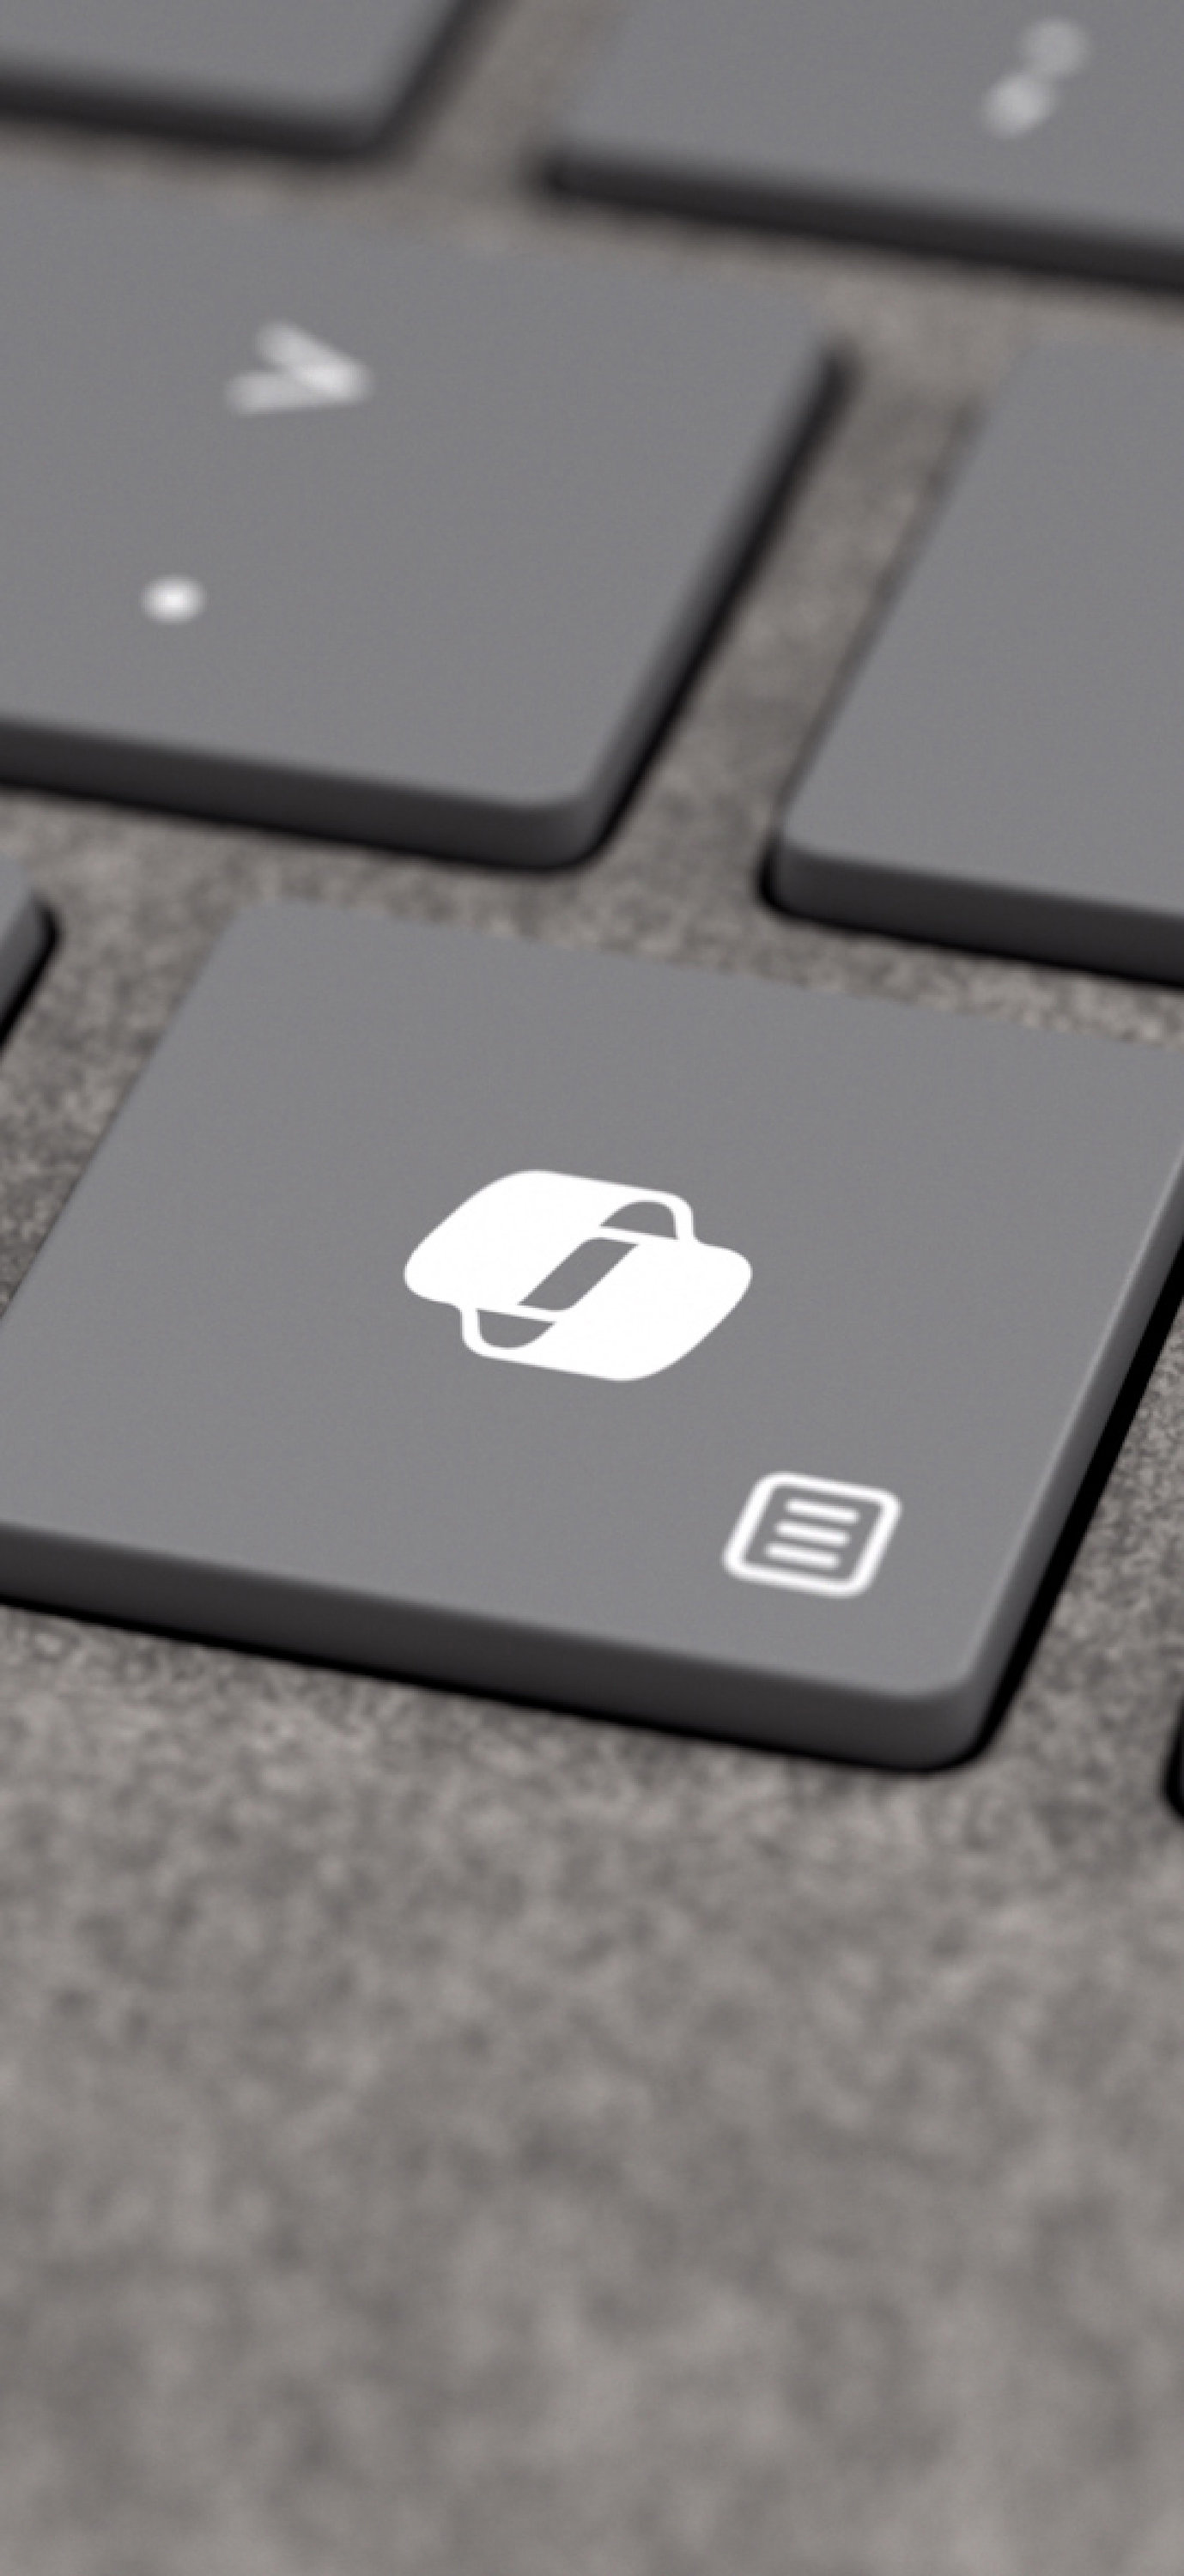 Image of the Surface Pro 10 Keyboard zoomed in on the new Copilot button